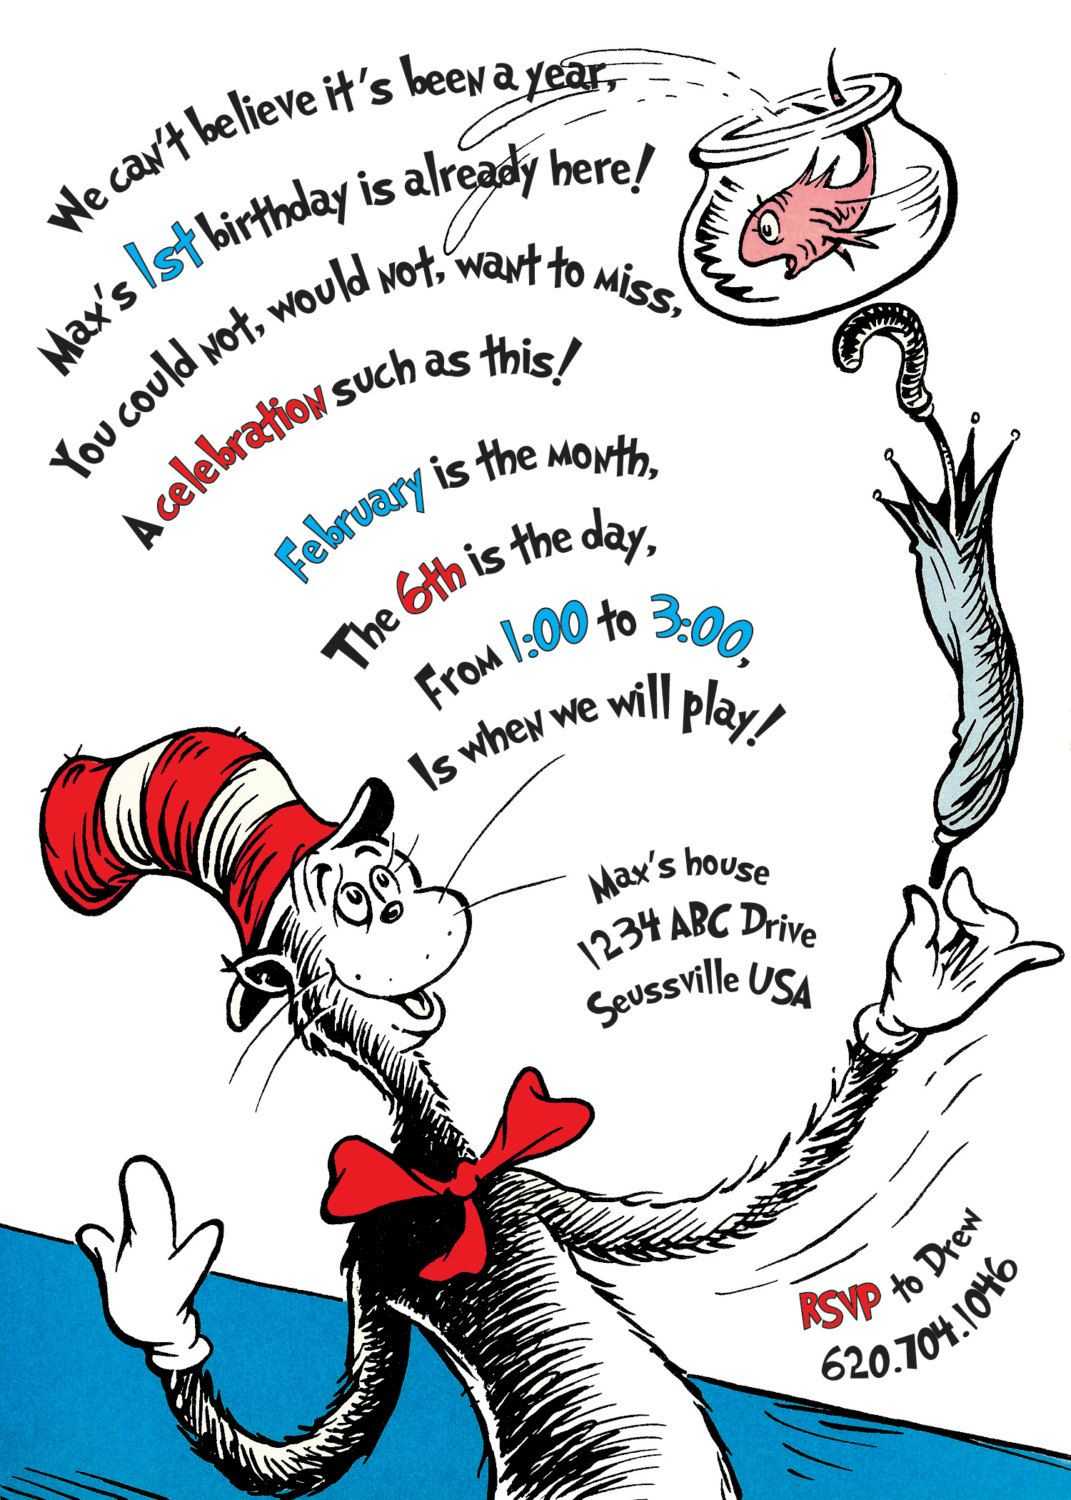 The Cat In The Hat Birthday Invitation. Printable | Dr Seuss With Dr Seuss Birthday Card Template